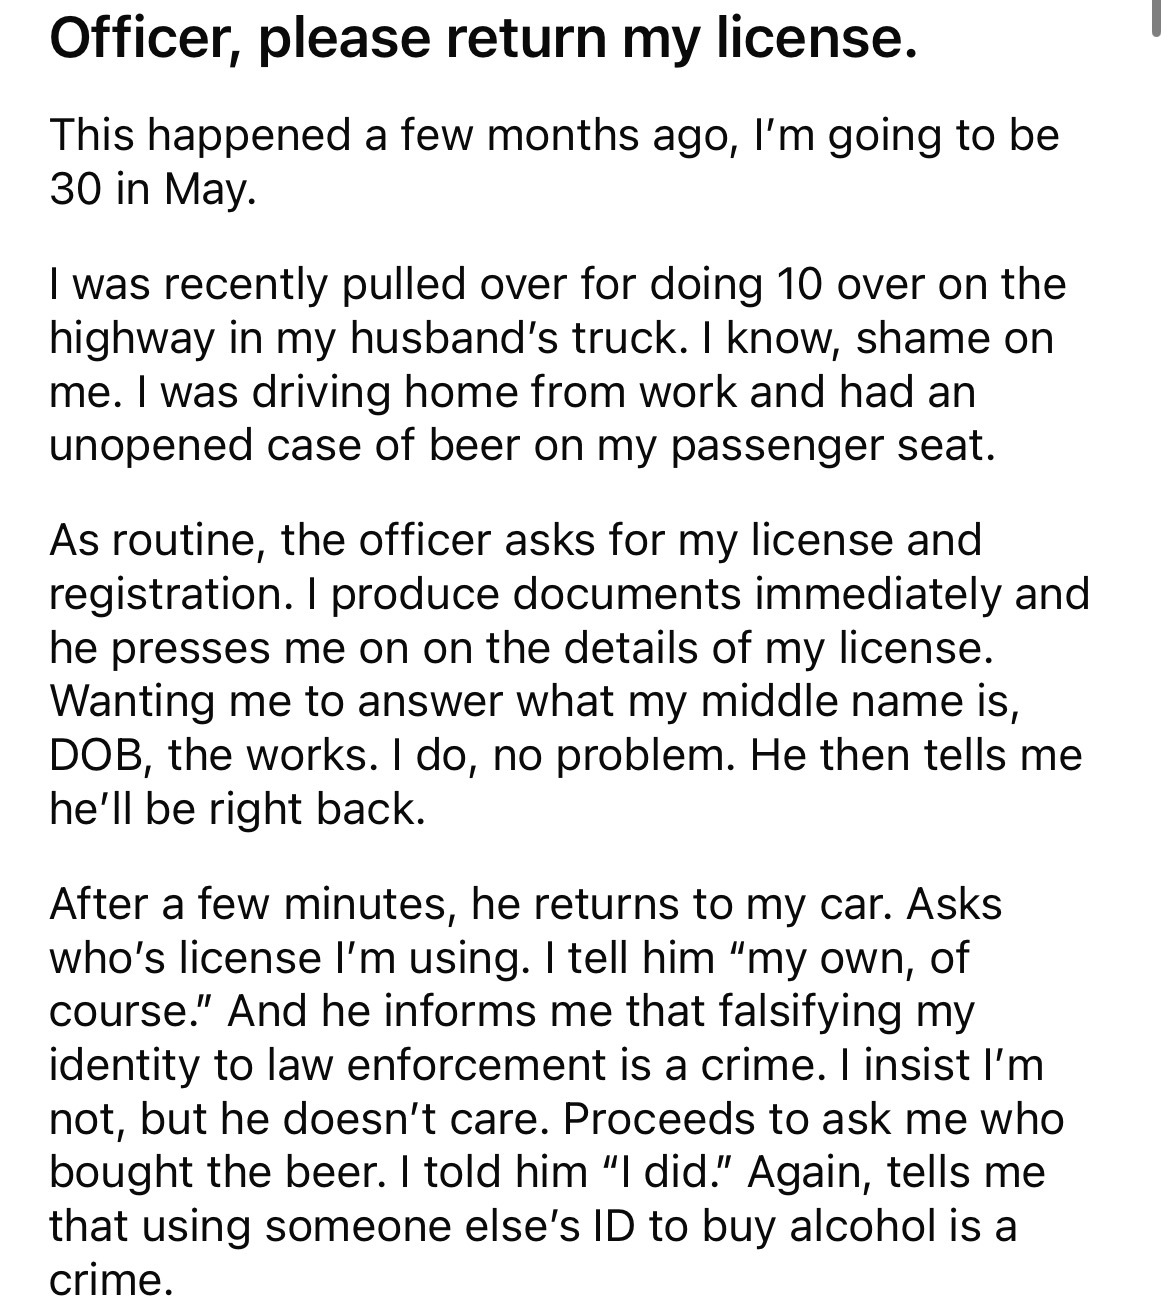 angle - Officer, please return my license. This happened a few months ago, I'm going to be 30 in May. I was recently pulled over for doing 10 over on the highway in my husband's truck. I know, shame on me. I was driving home from work and had an unopened 